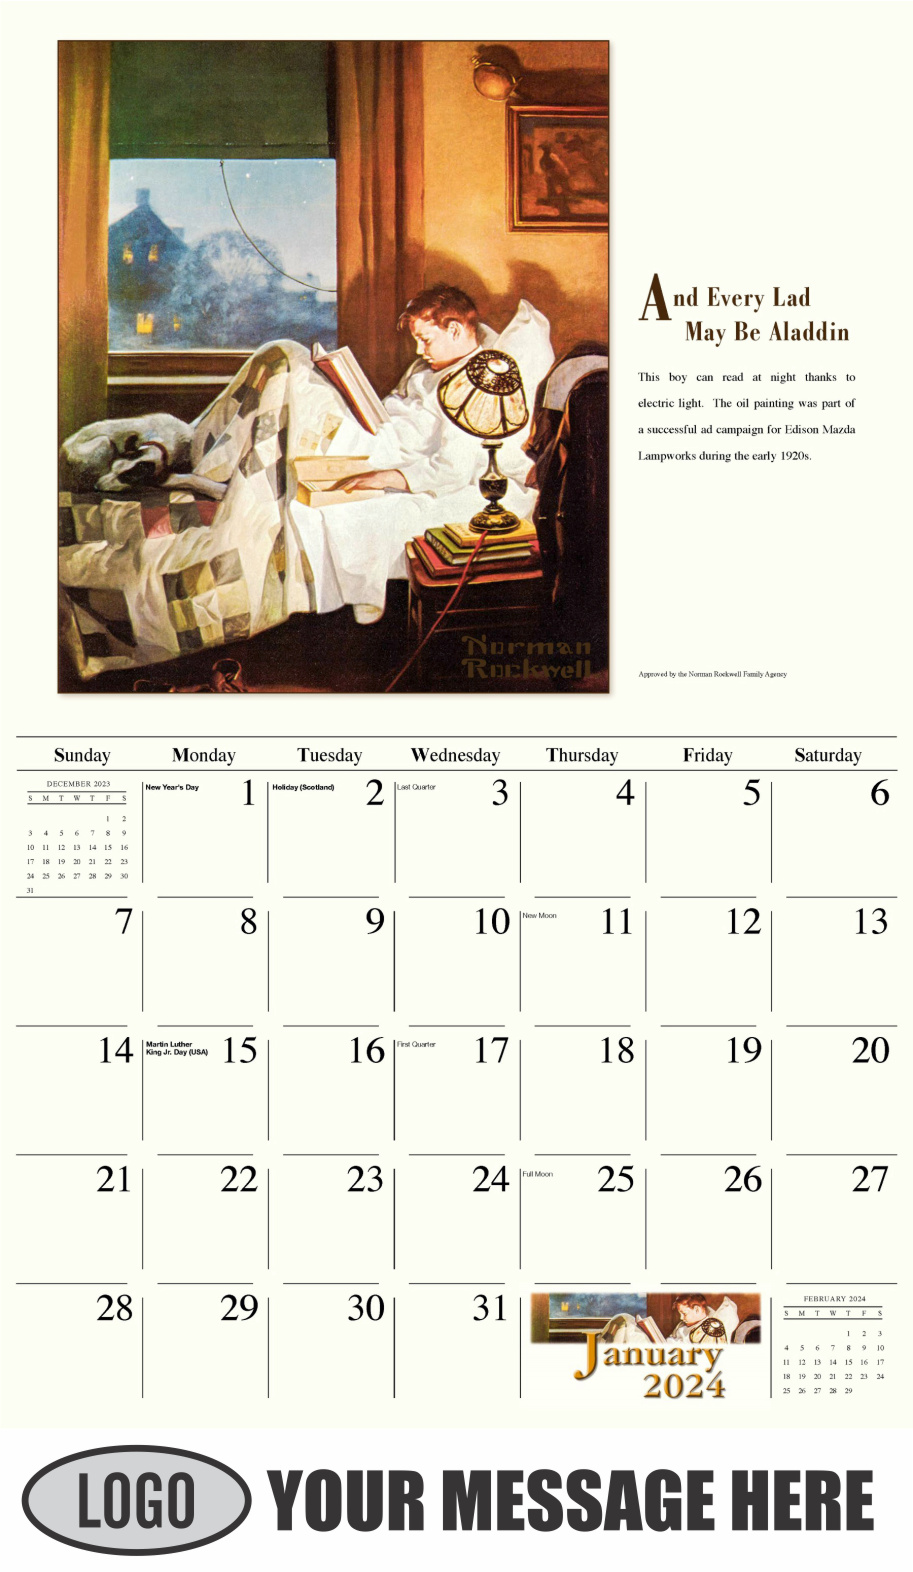 Memorable Images by Norman Rockwell 2024 Business Promotional Wall Calendar - January